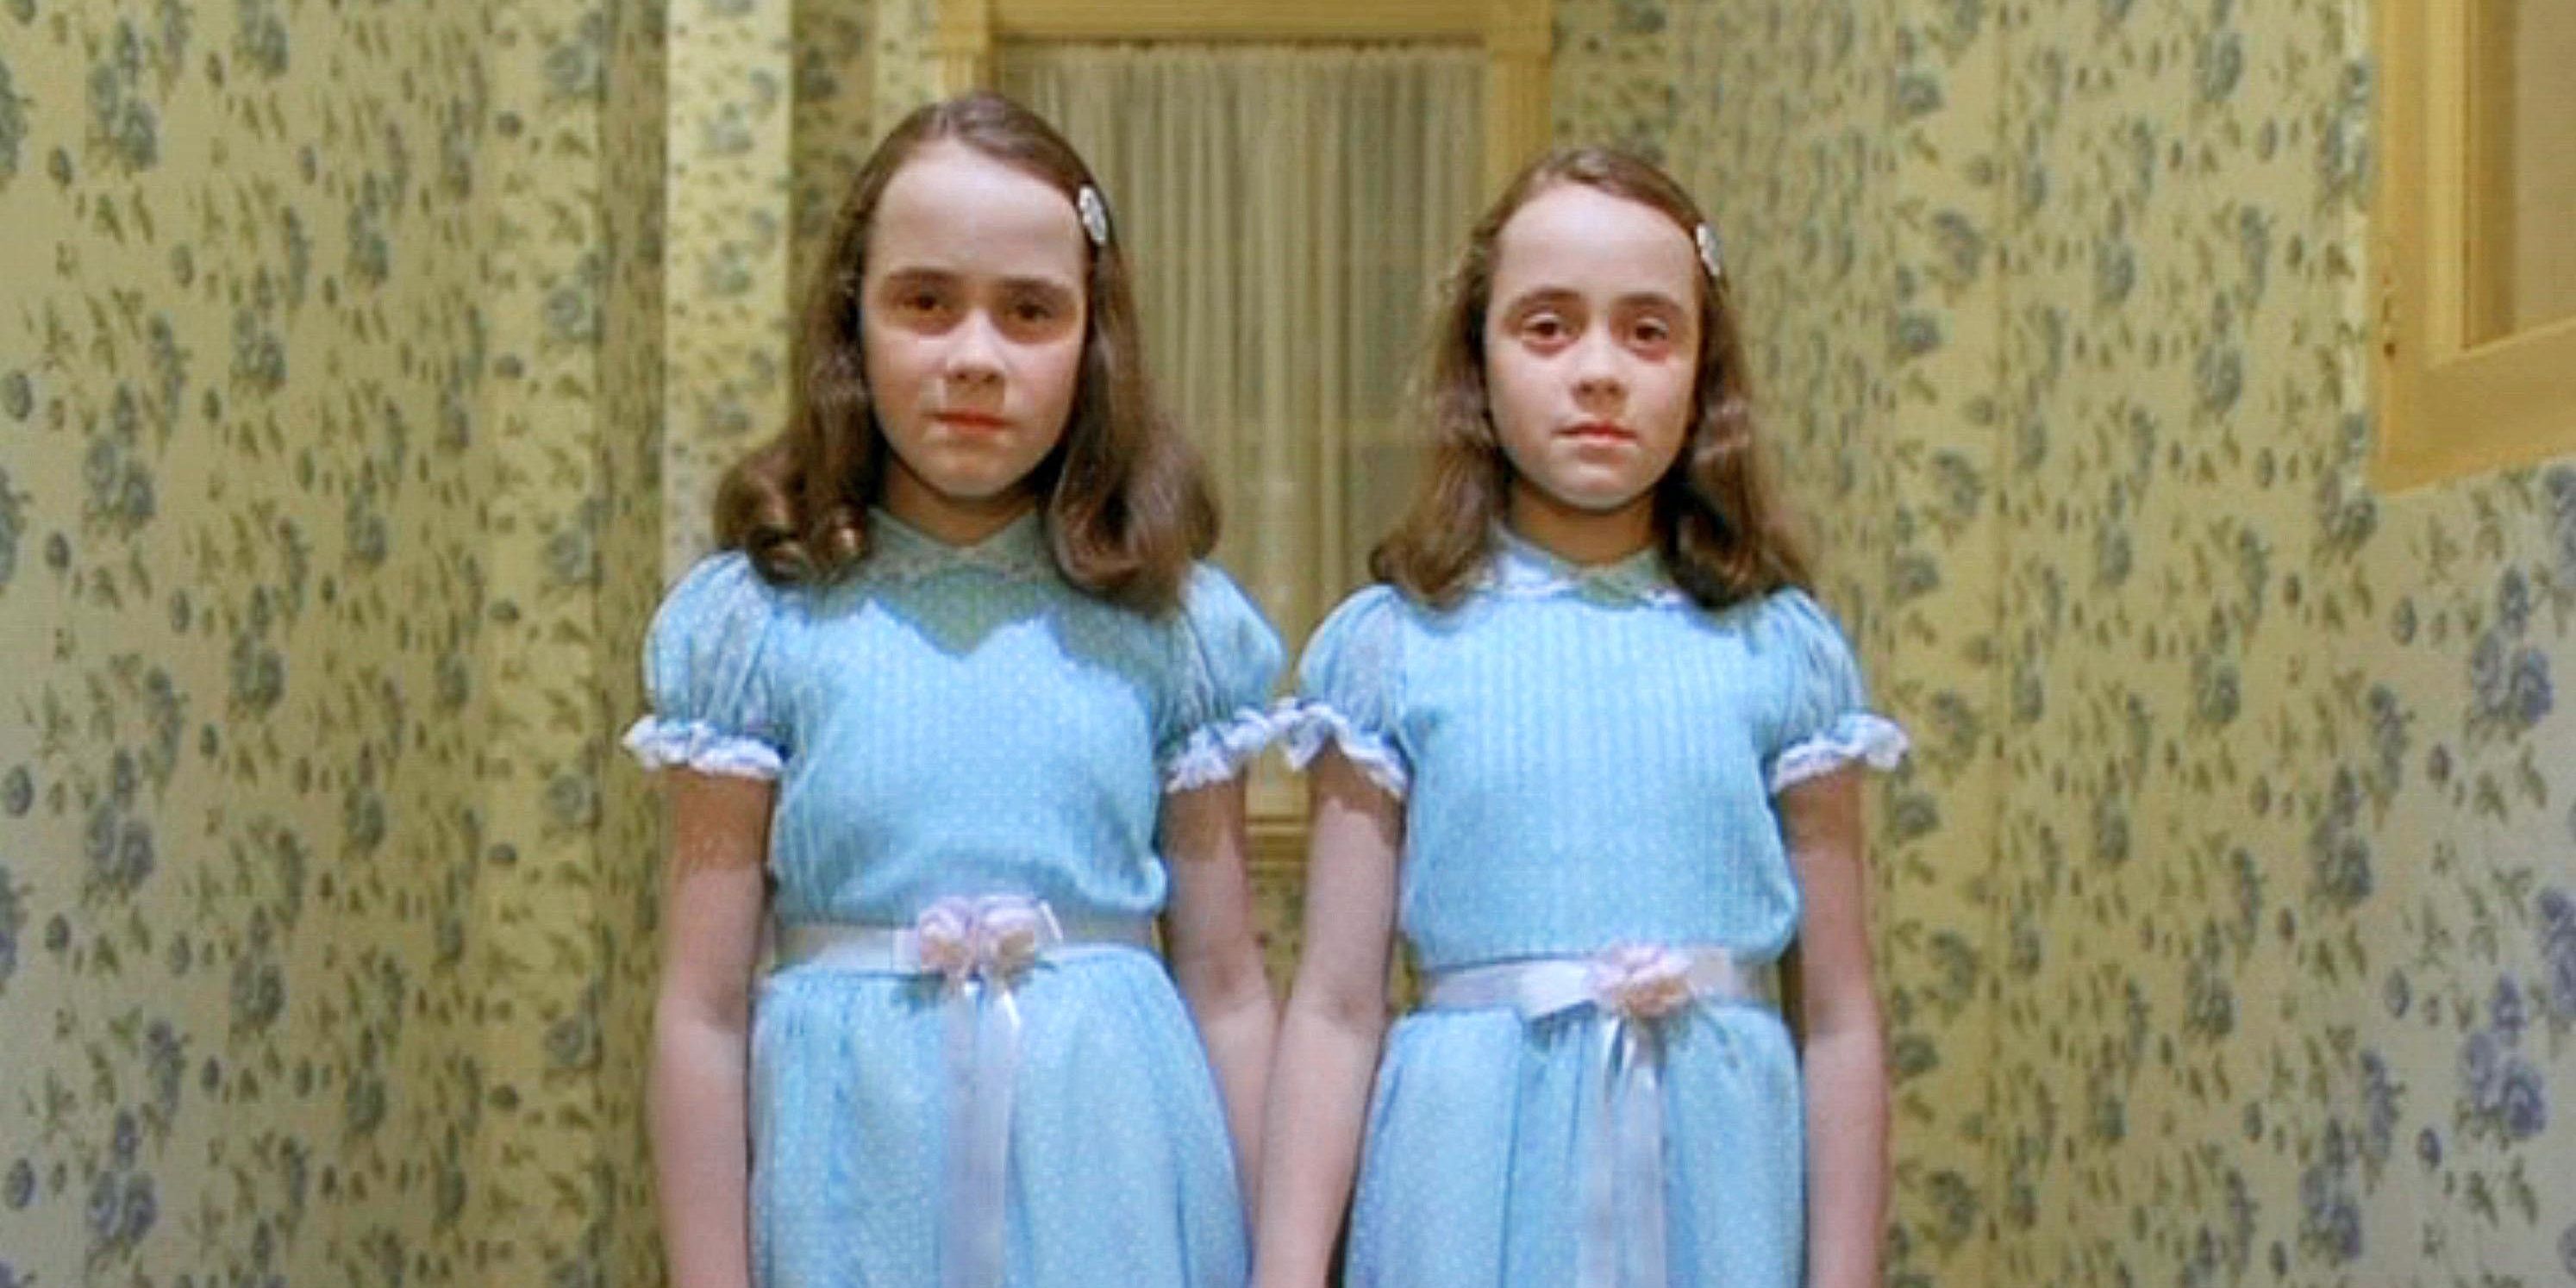 The Shining Twins holding hands in their signature blue dresses